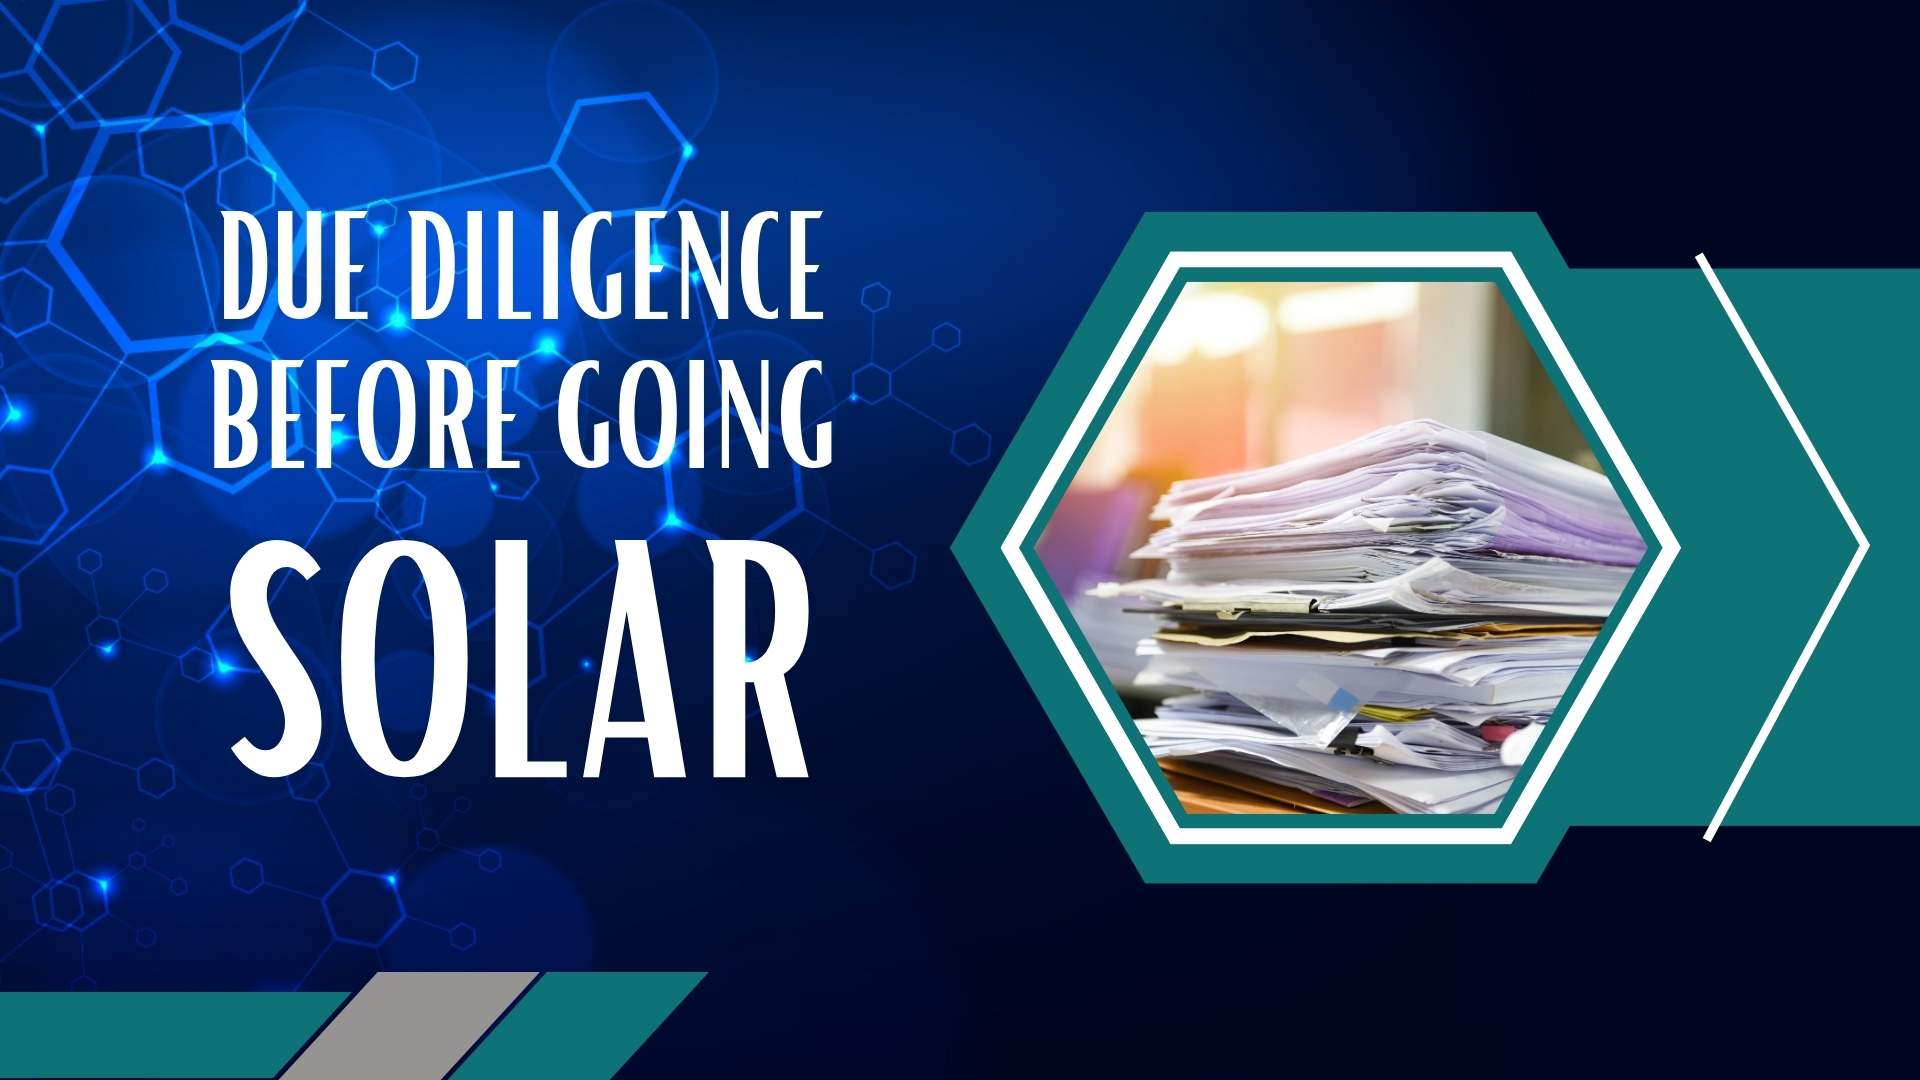 Due diligence before going SOLAR